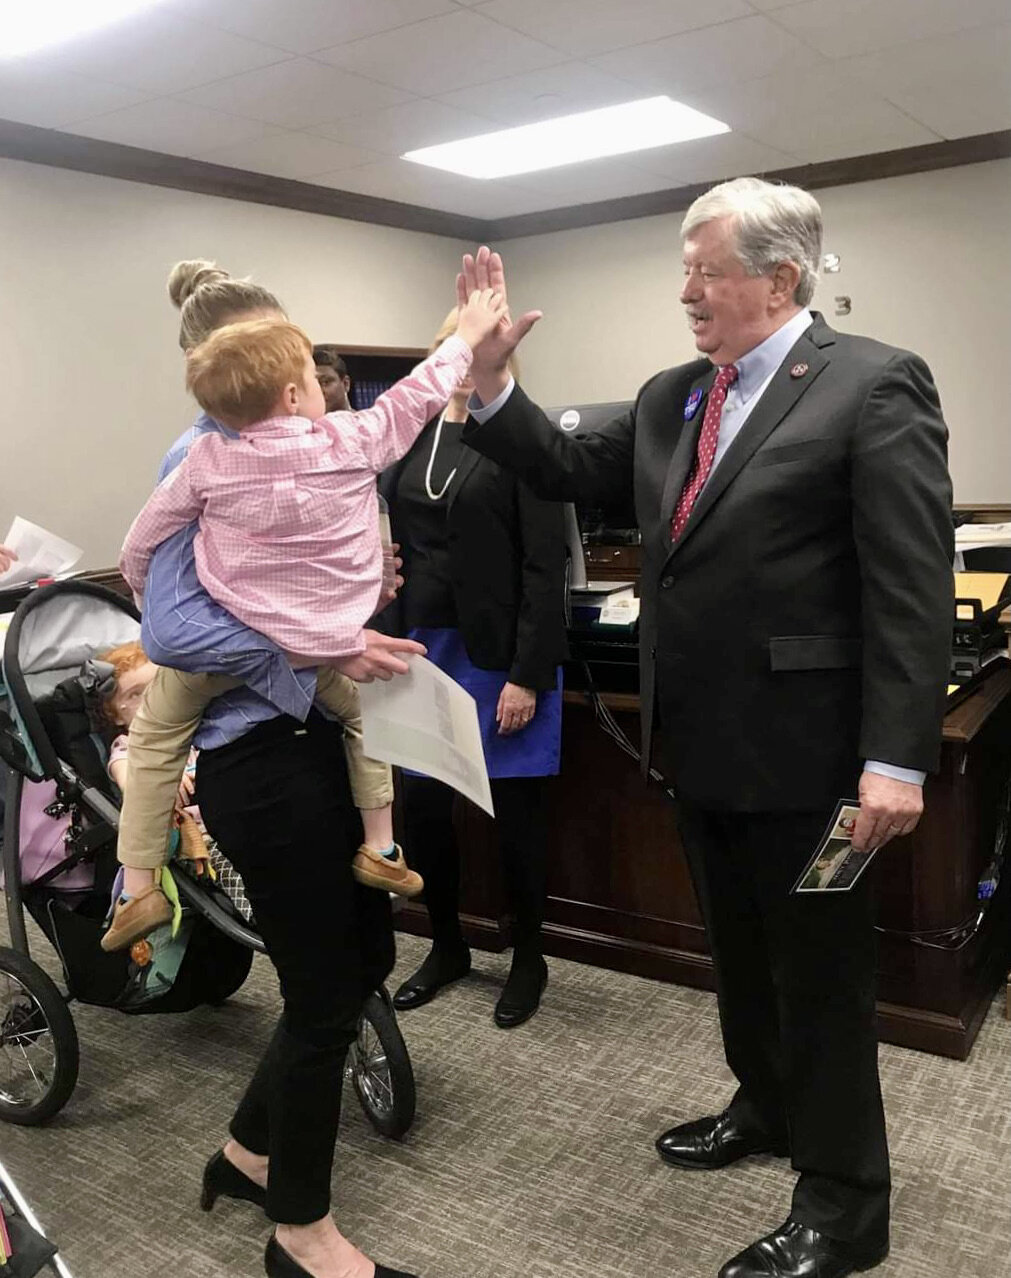  A mom holds a young girl who gives a legislator a high-five. 